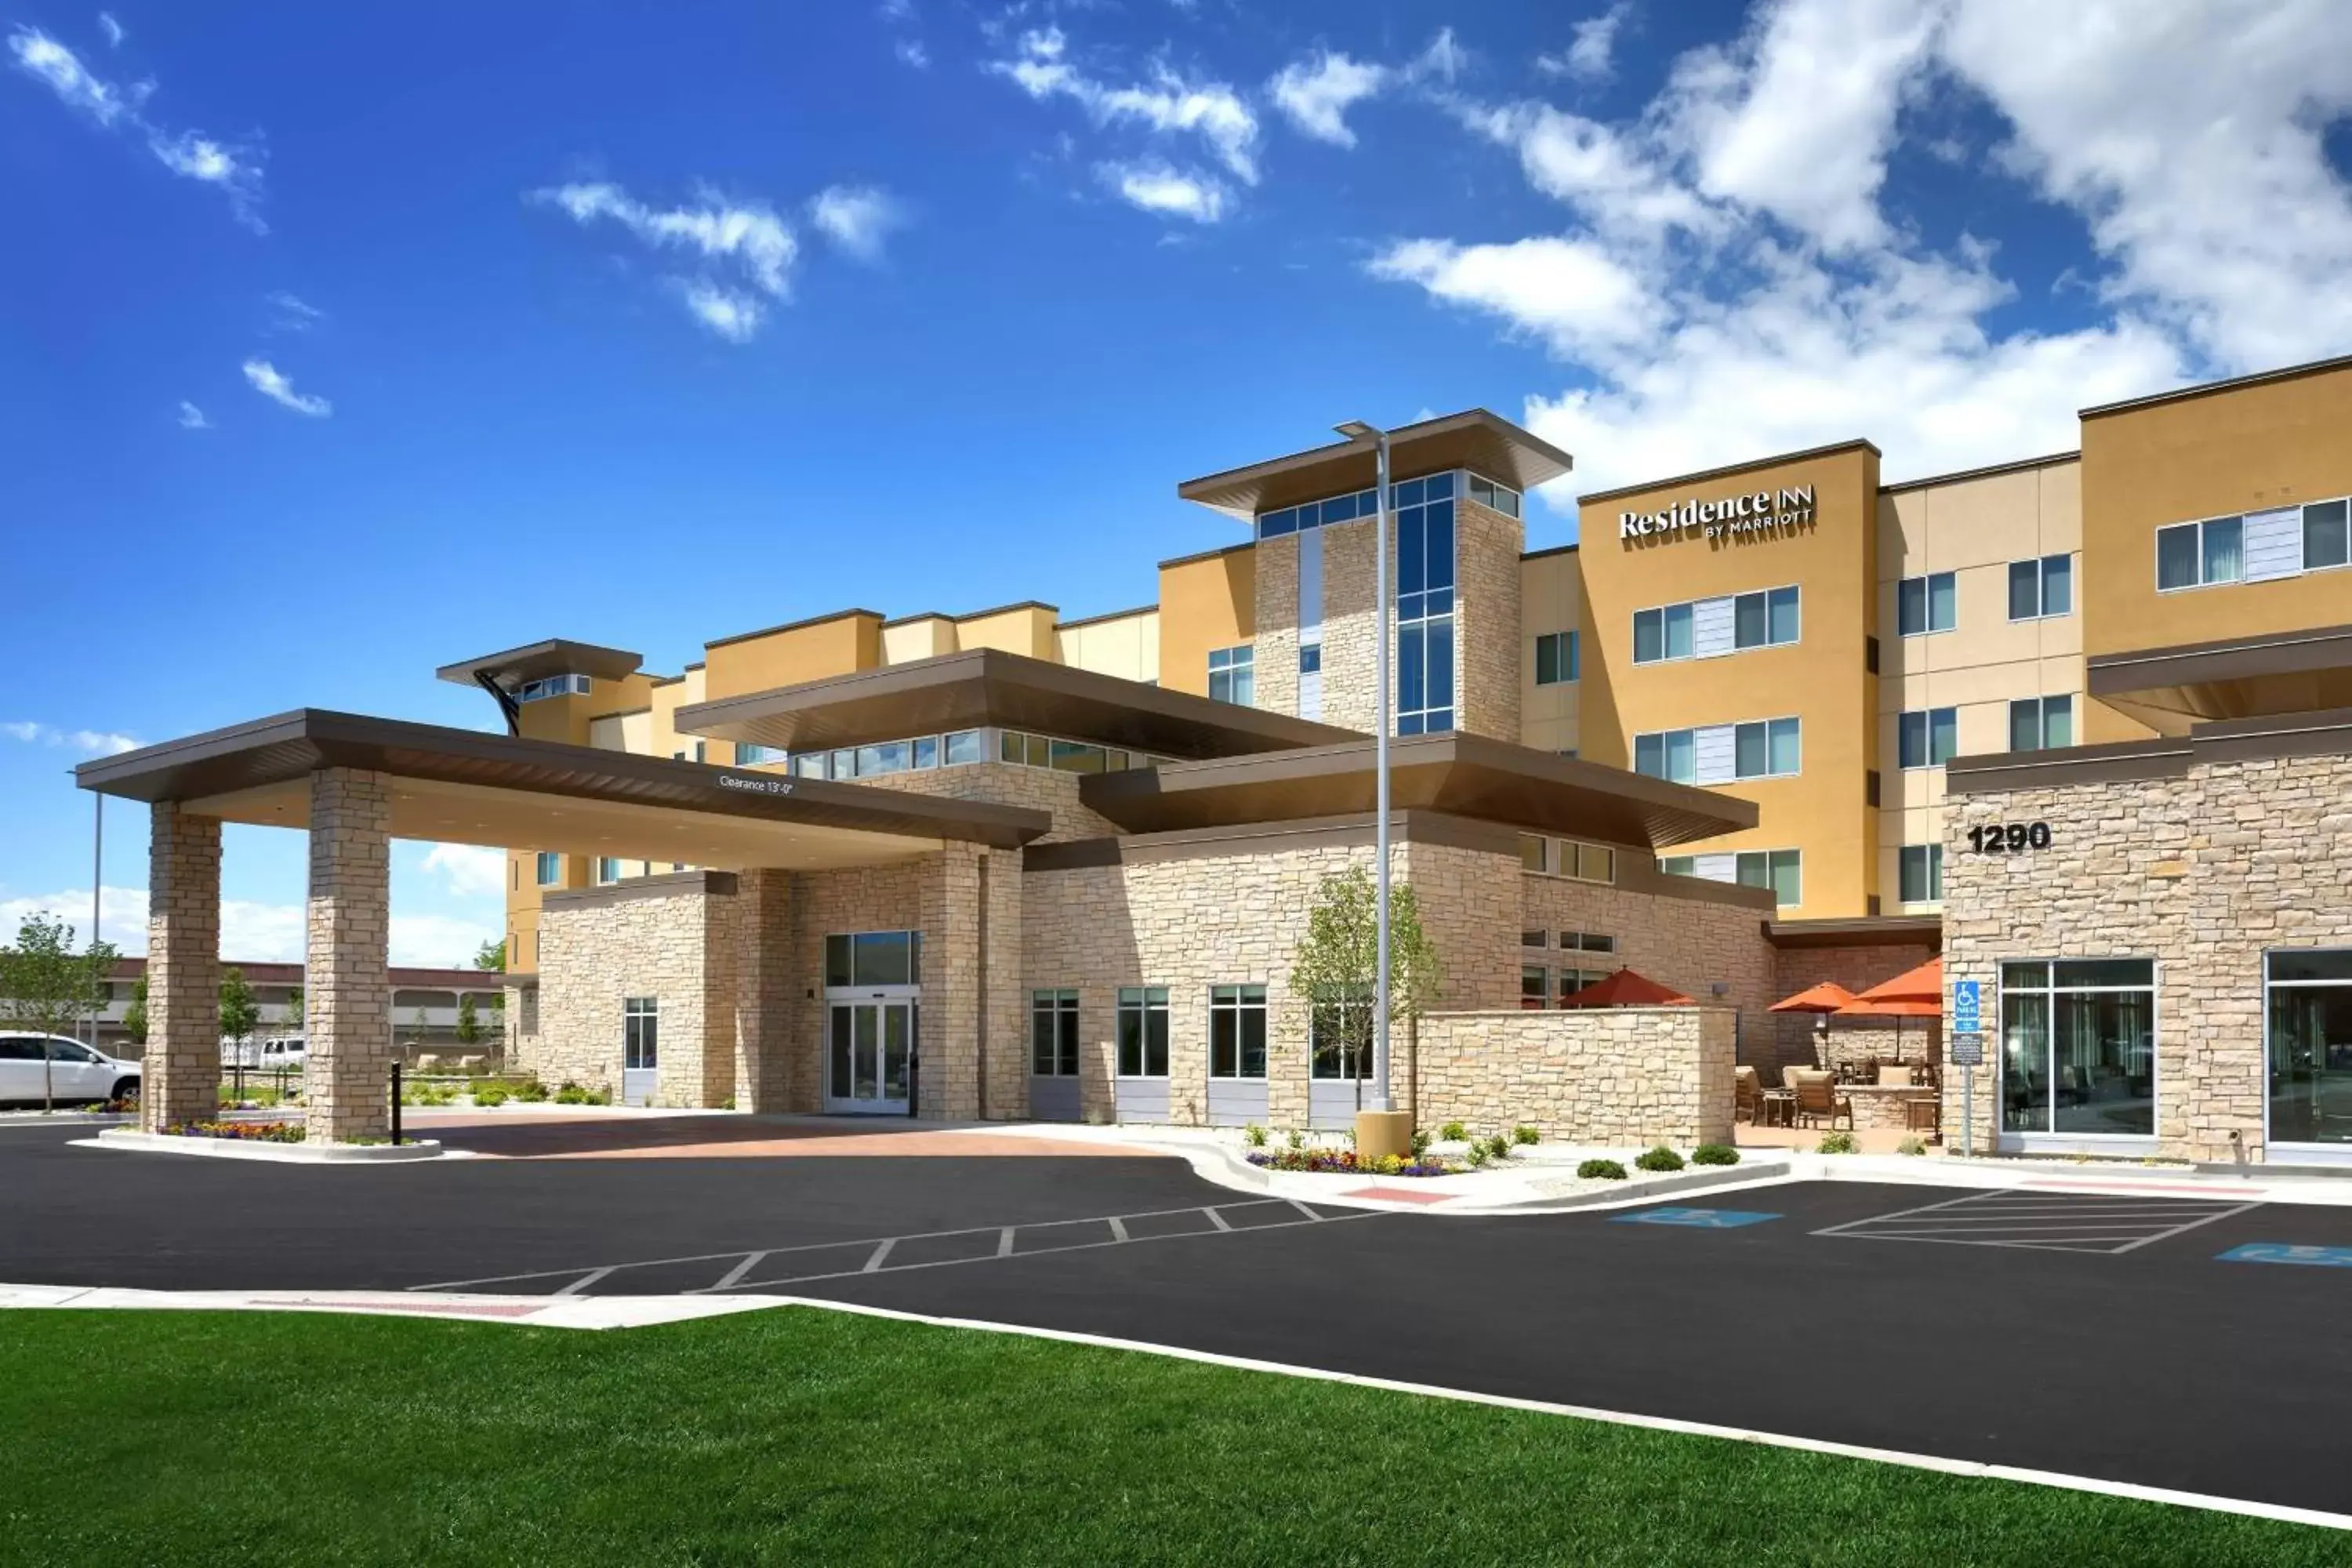 Property Building in Residence Inn by Marriott Provo South University